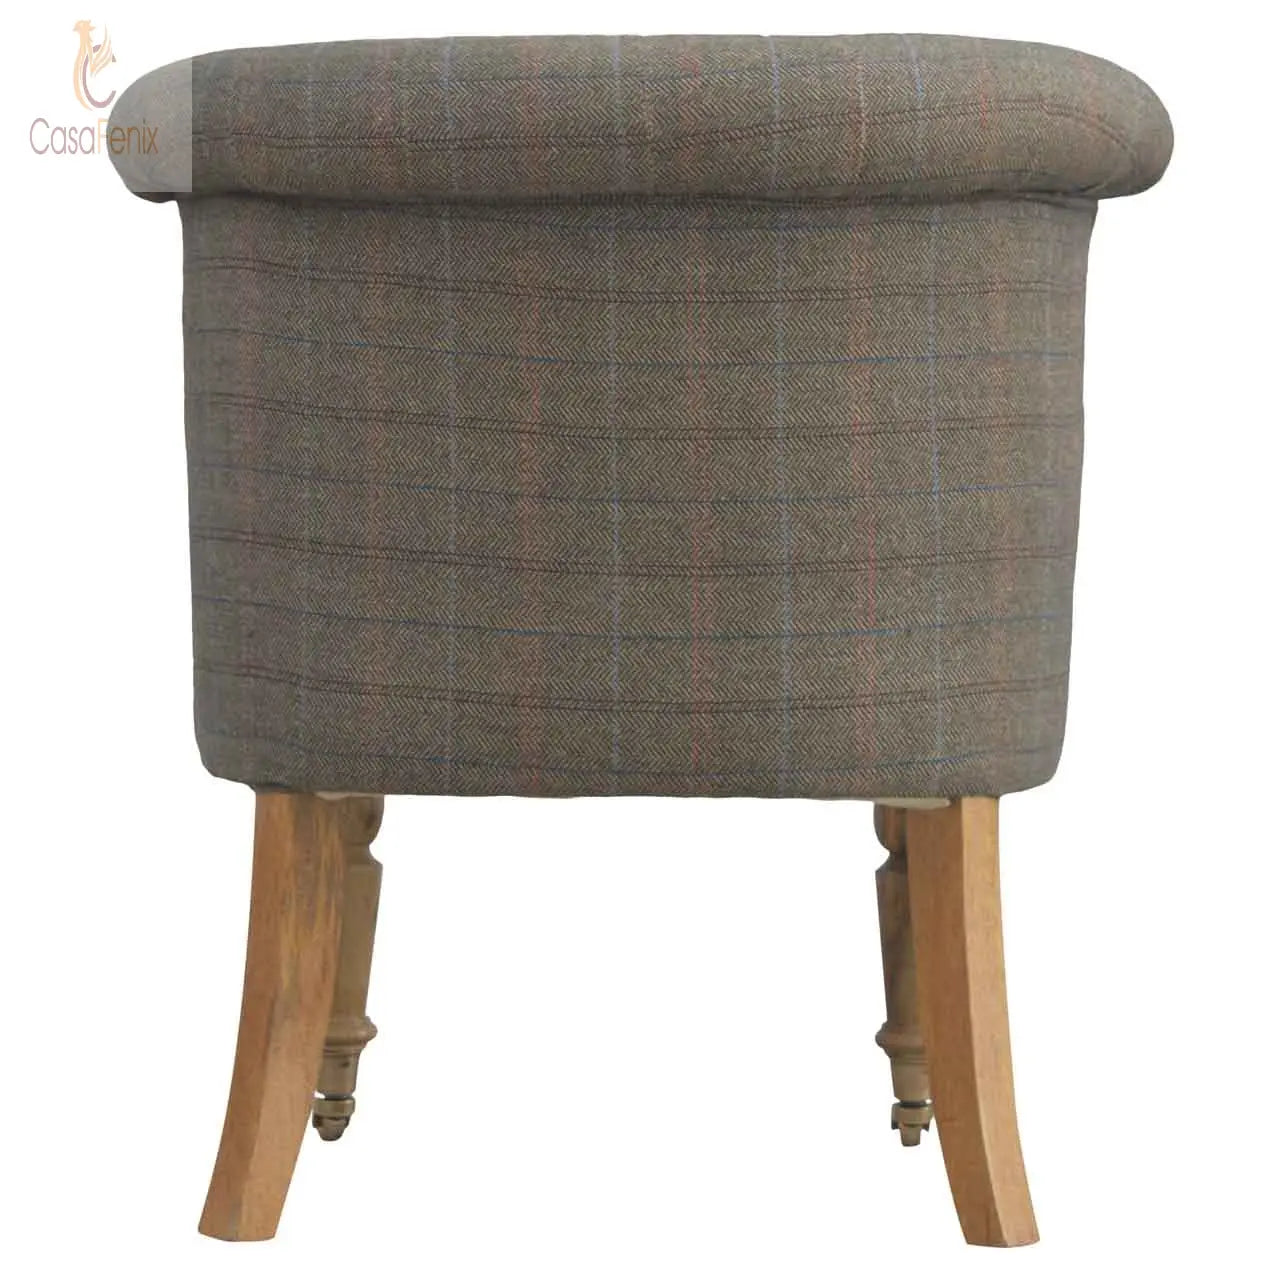 Small Multi Tweed Accent Chair Crafted with solid mango wood - CasaFenix